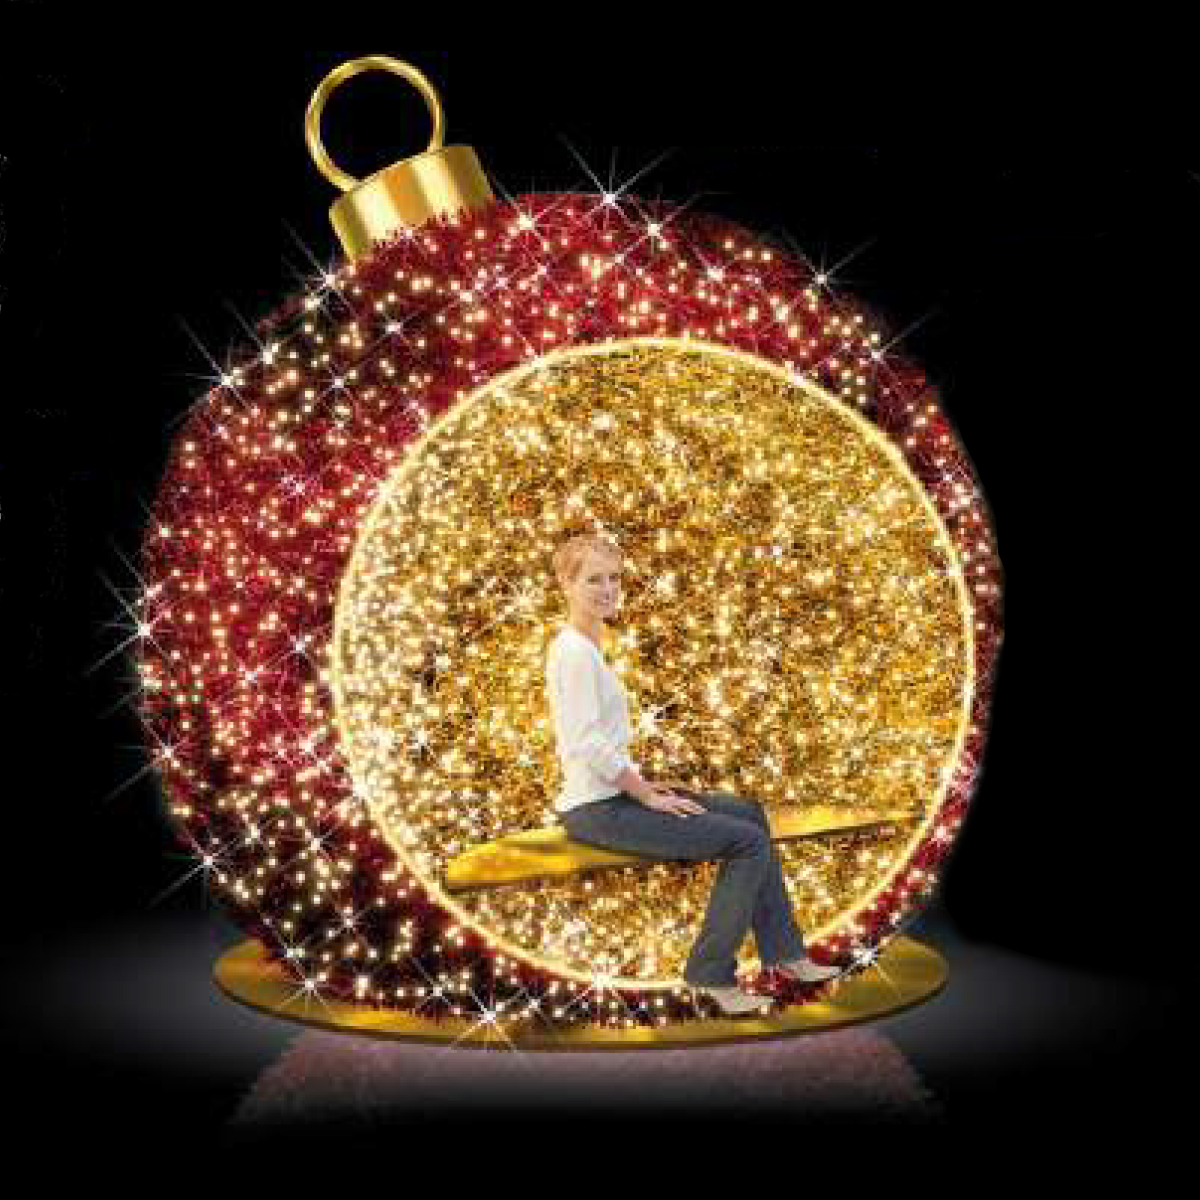 Sit-in Ornament - Deluxe Christmas Display - Red Ornament With Gold Seat - 8.5ft Tall